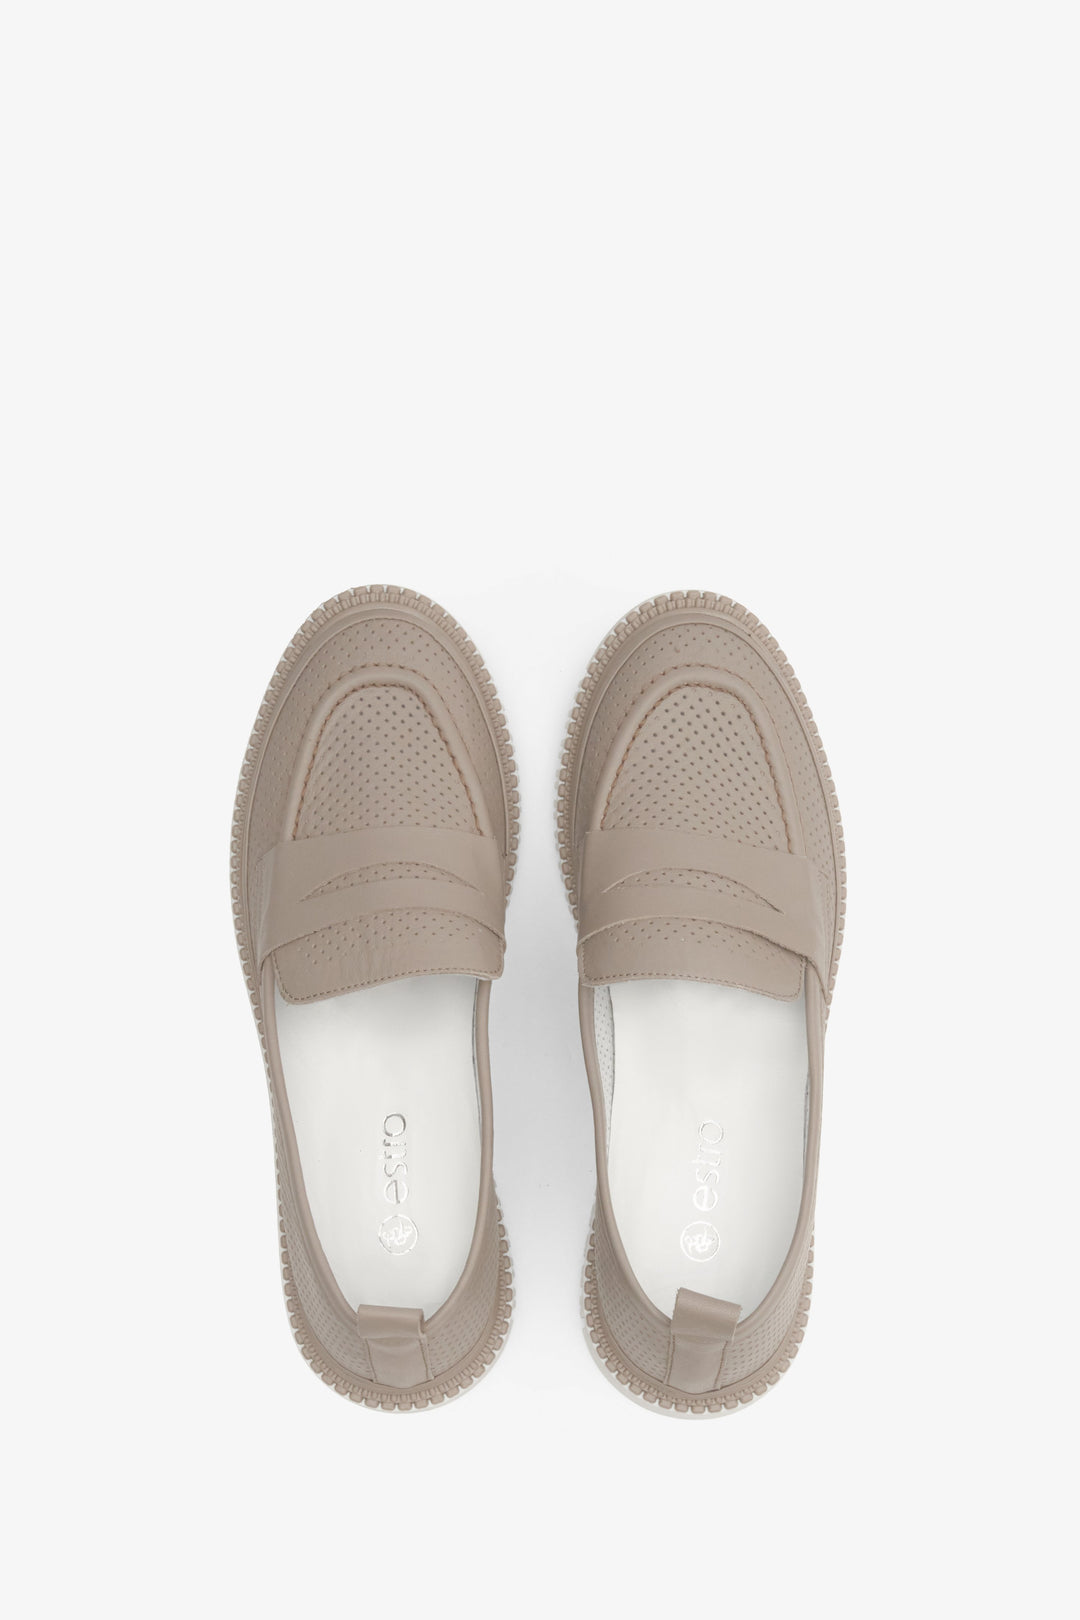 Beige women's flat loafers made of natural leather by Estro - presentation of the footwear from above.